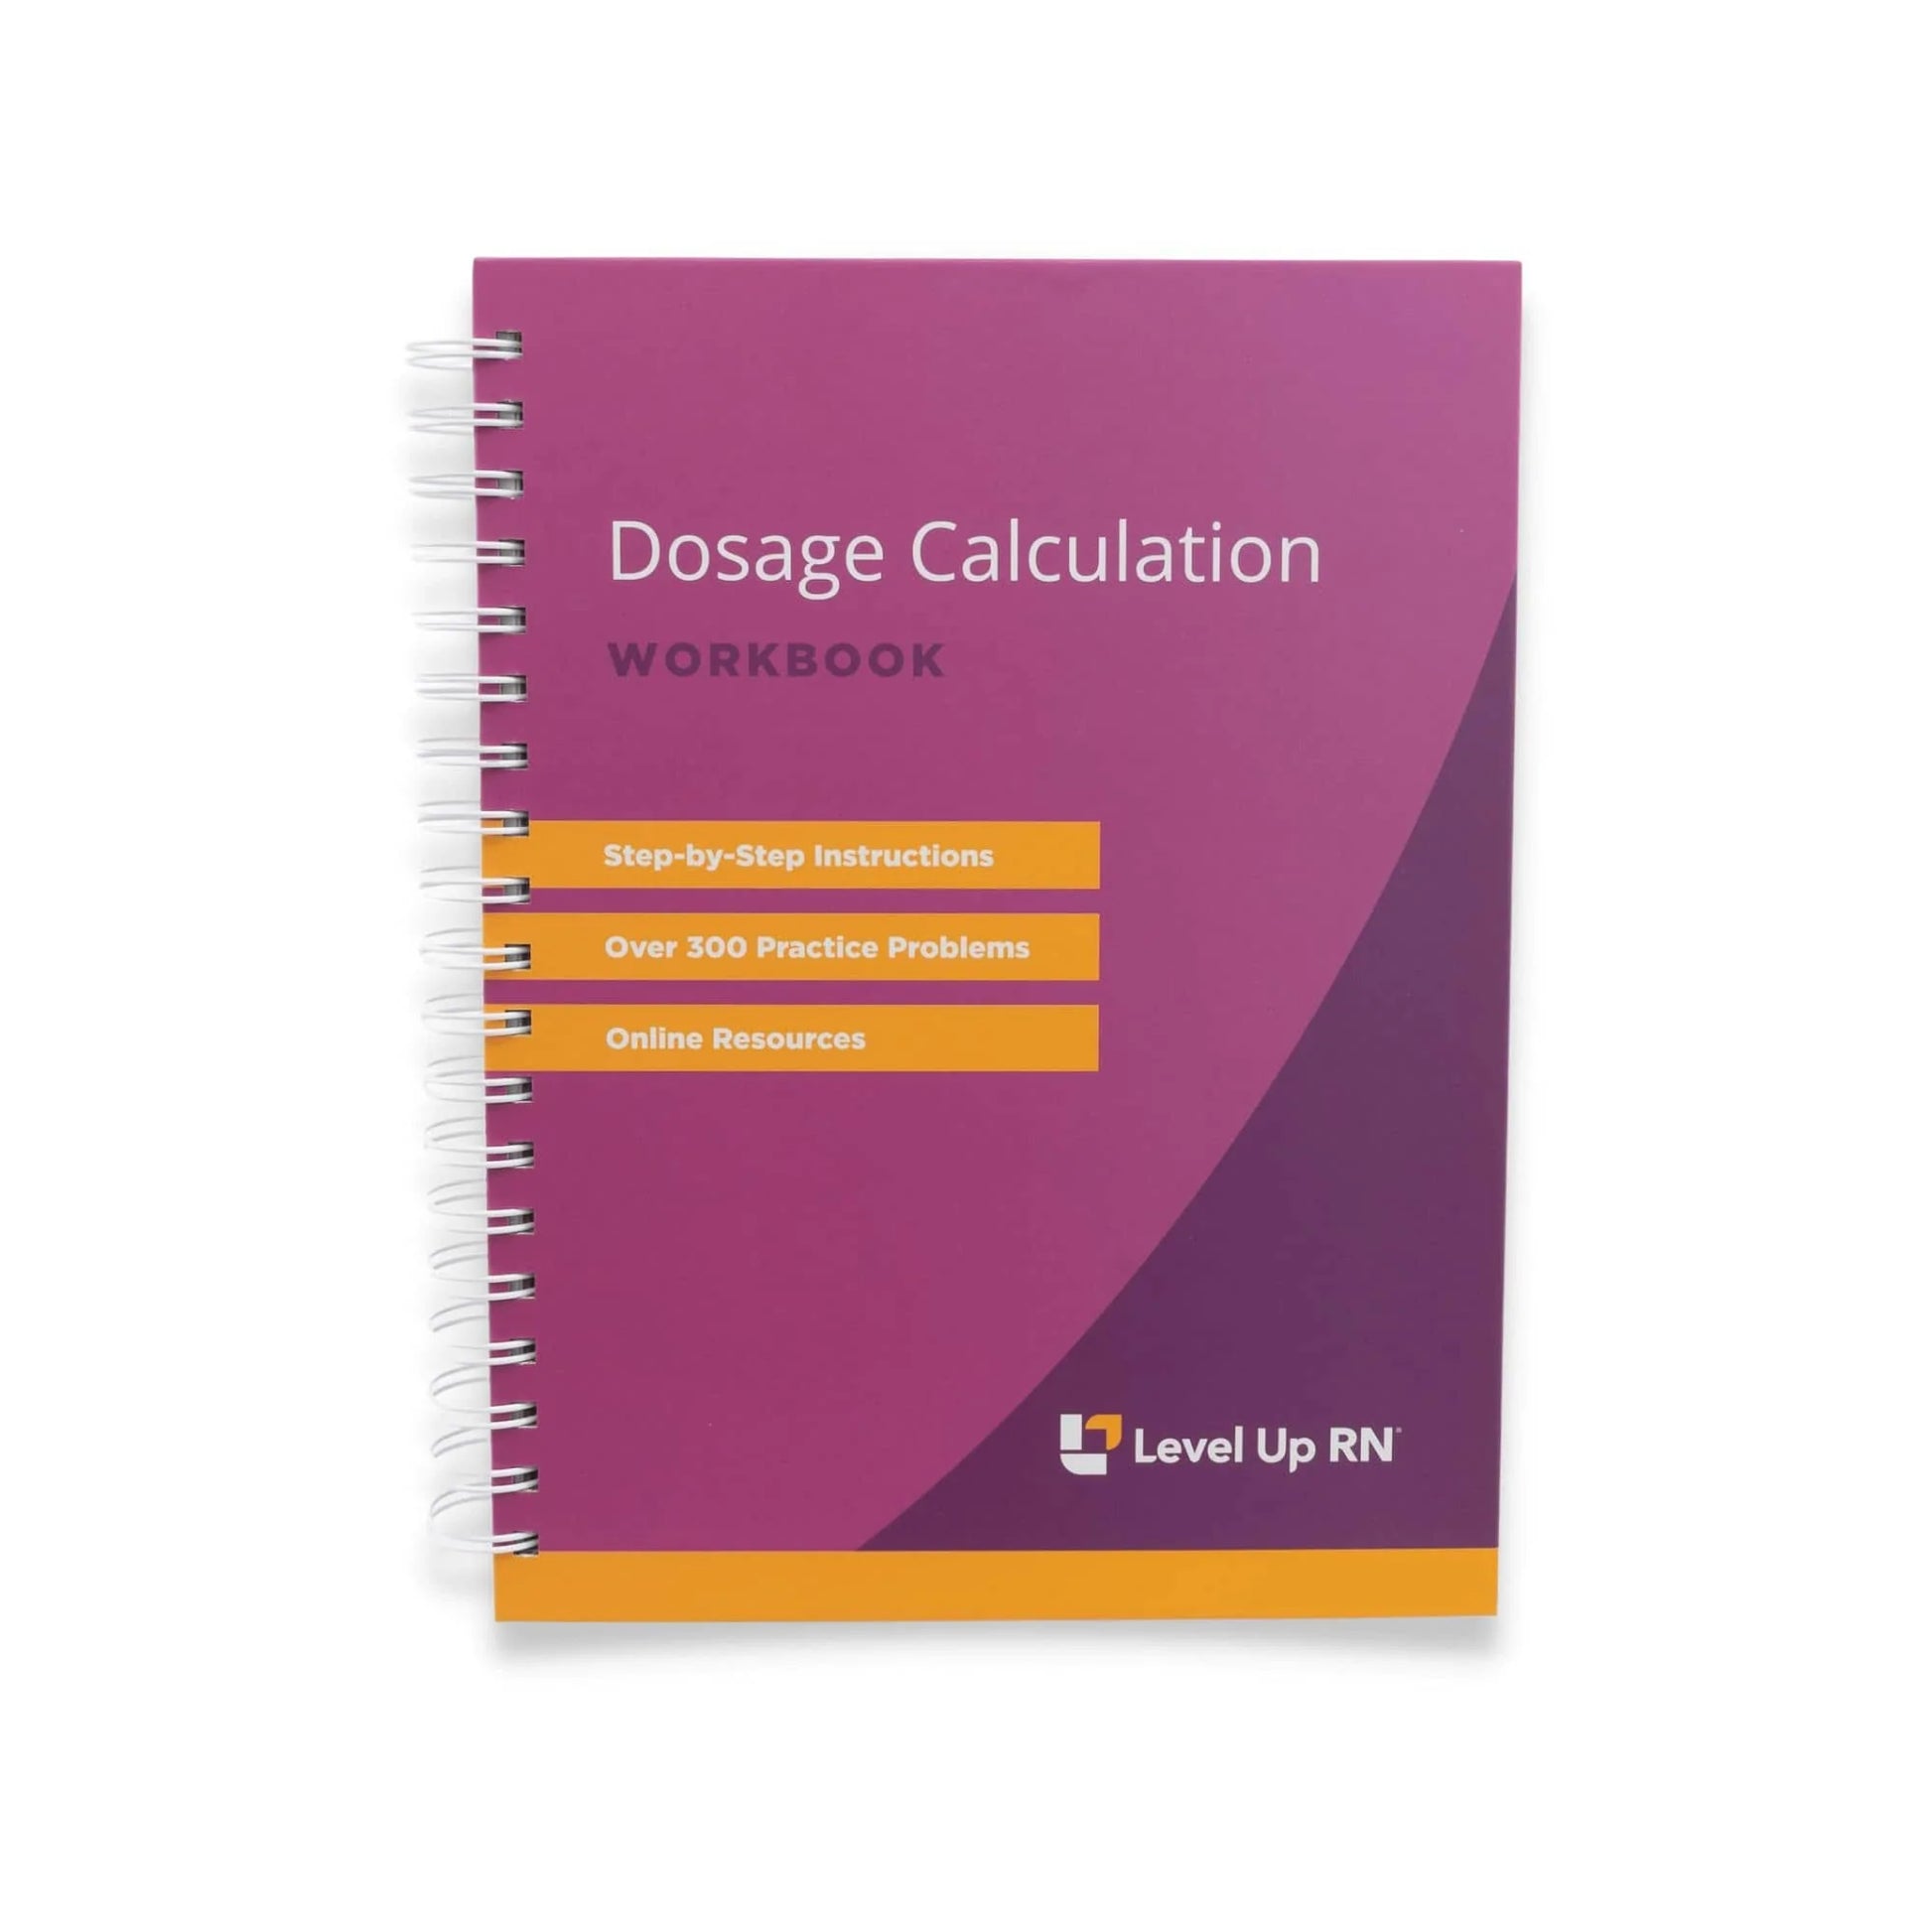 dosage calc workbook included in The Comprehensive Nursing Collection